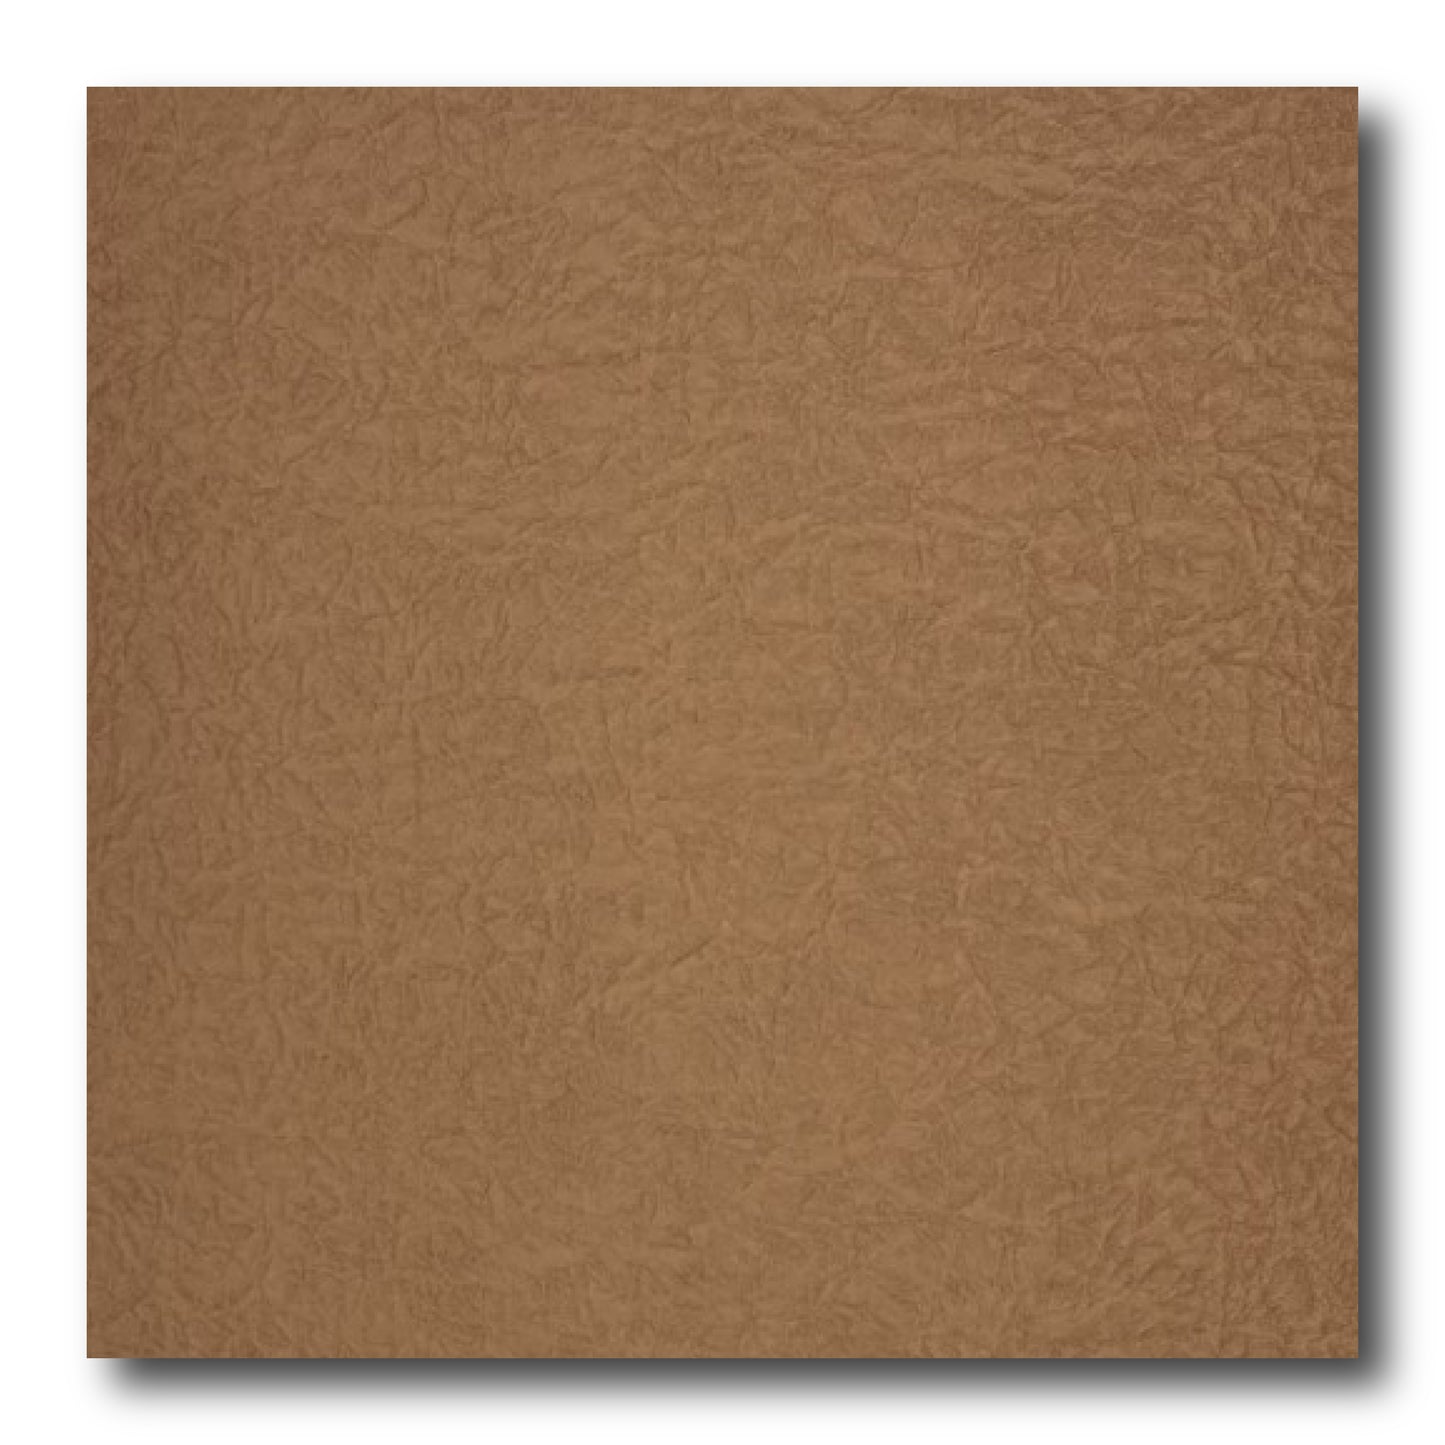 Echizen Momigami (Dual Sided: Sepia Brown)(Sold per sheet) 35cm